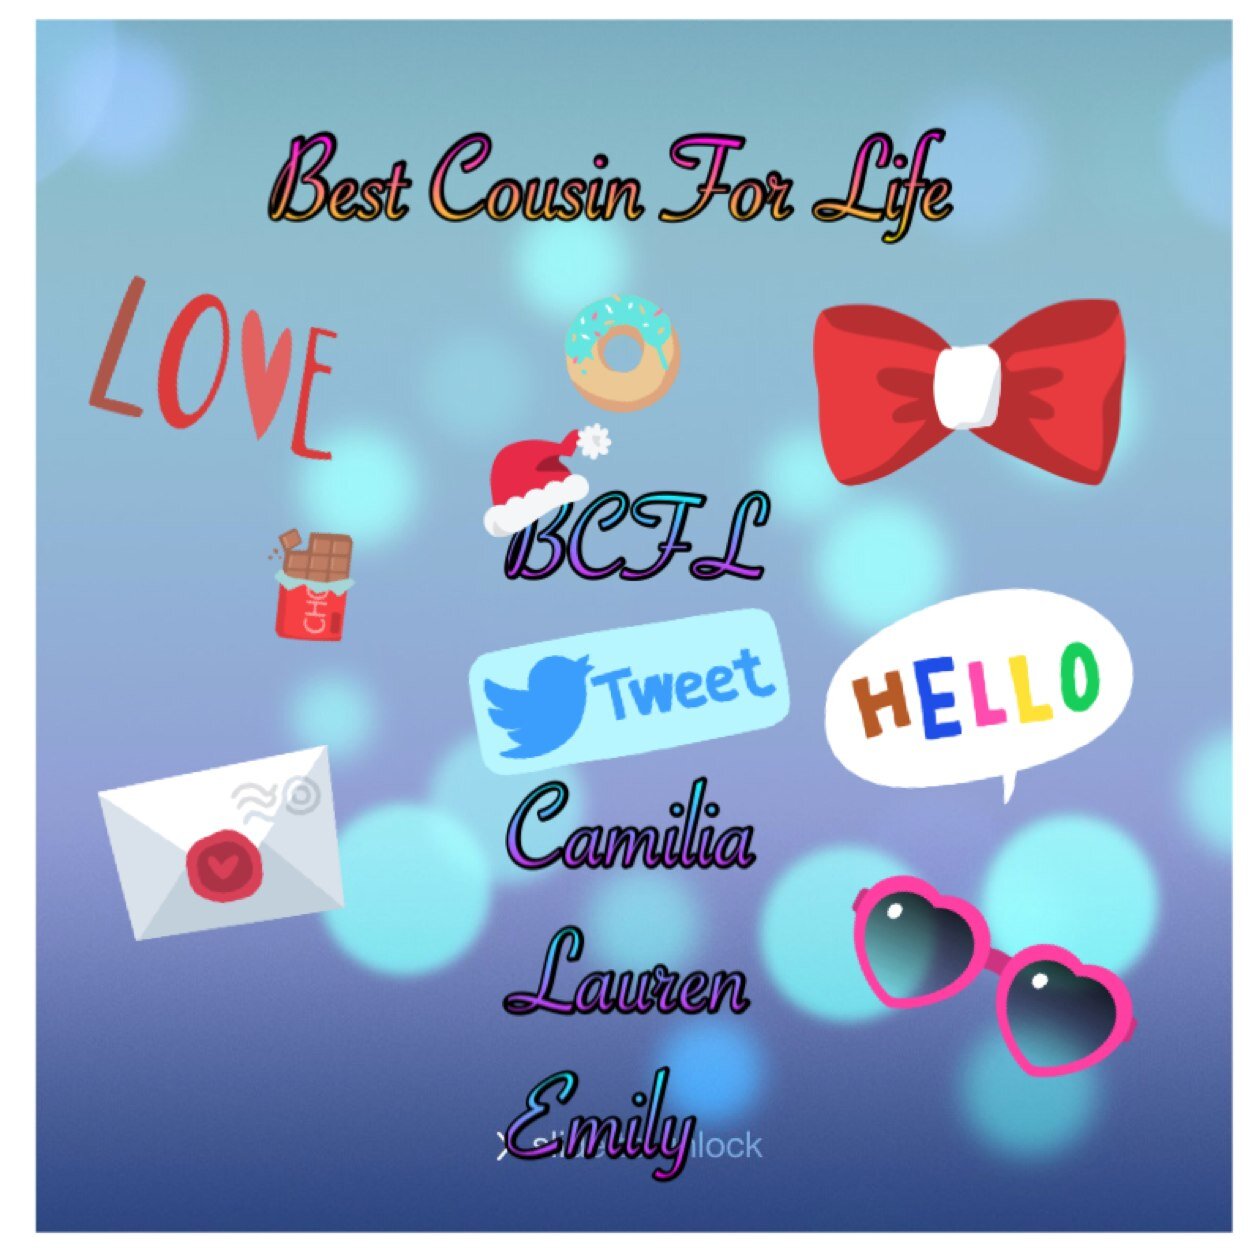 Hey guys I'm in the BCFL group stands for Best cousin for life and there are 4 people in are group Camilia(BCFL) is one!